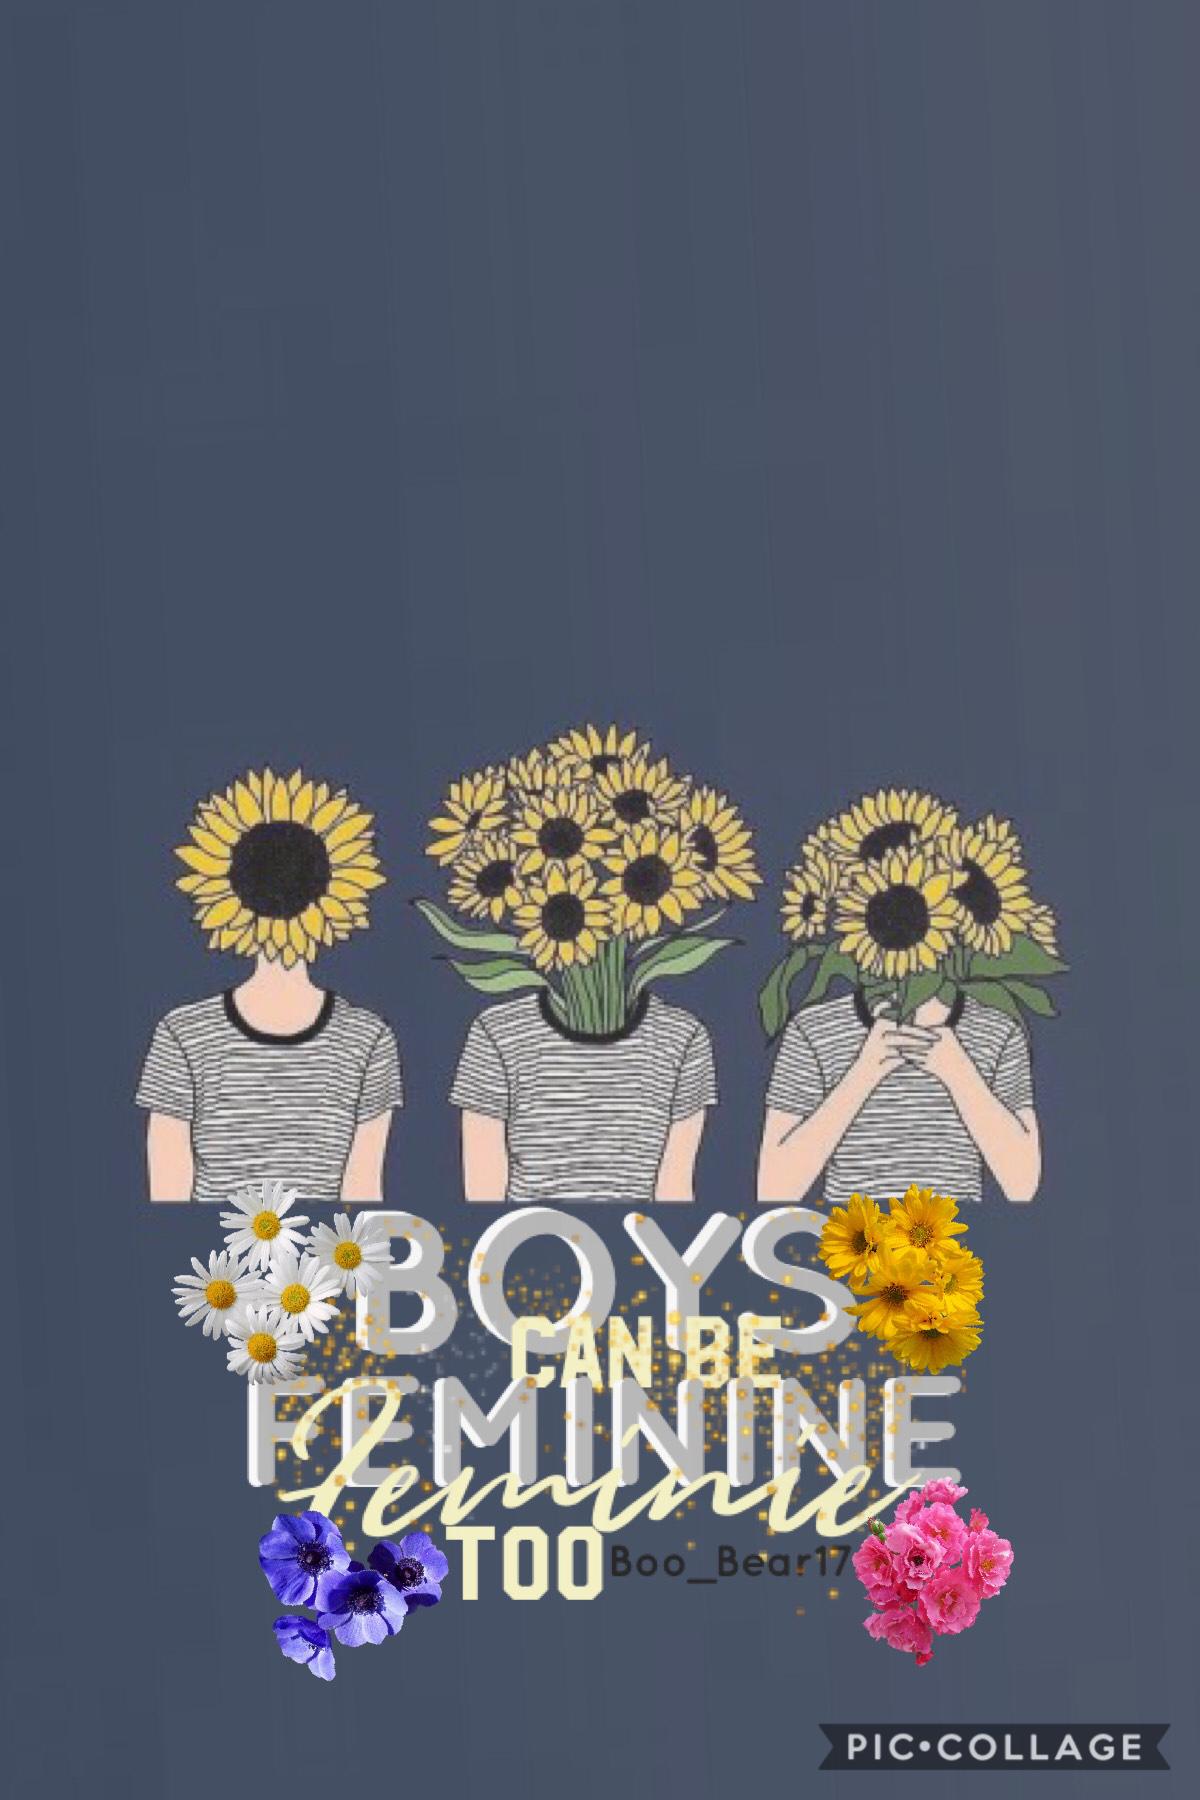 🌼boys can be feminine too🌼
•I’ve been so sad lately, but at least summer has begun
•song rec: Painkiller by Ruel 